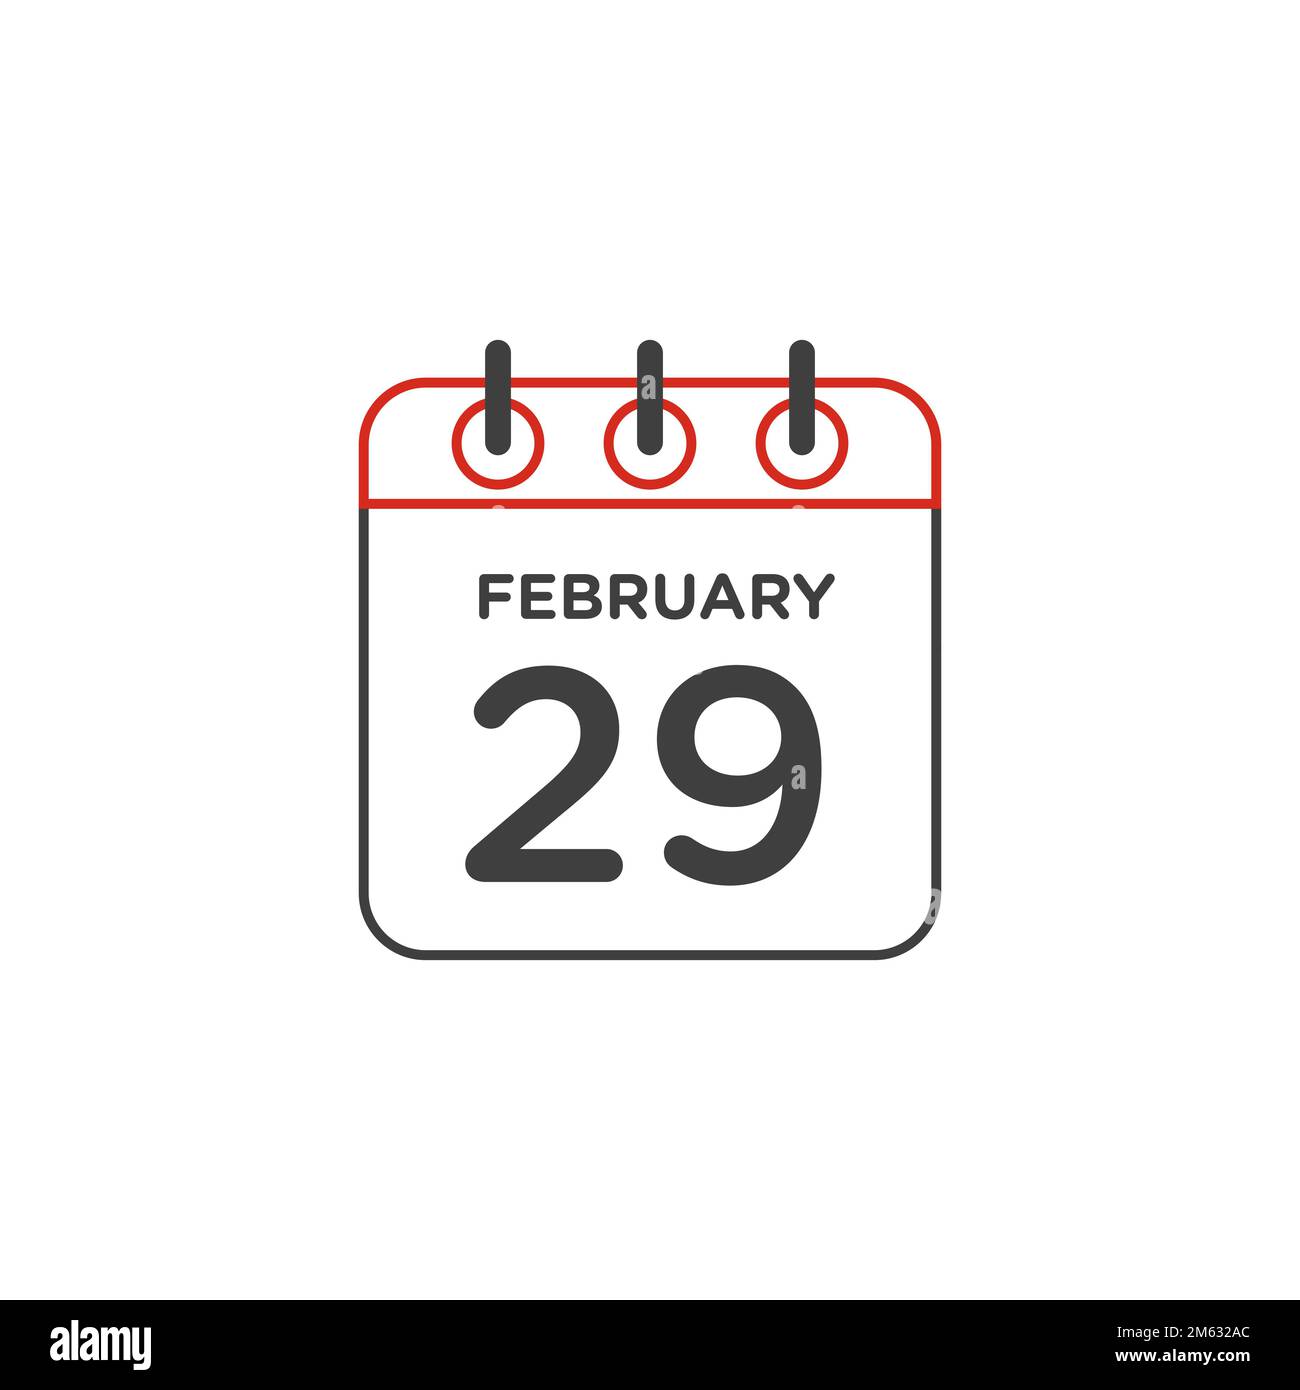 line icon calendar february 29th design vector isolated on white